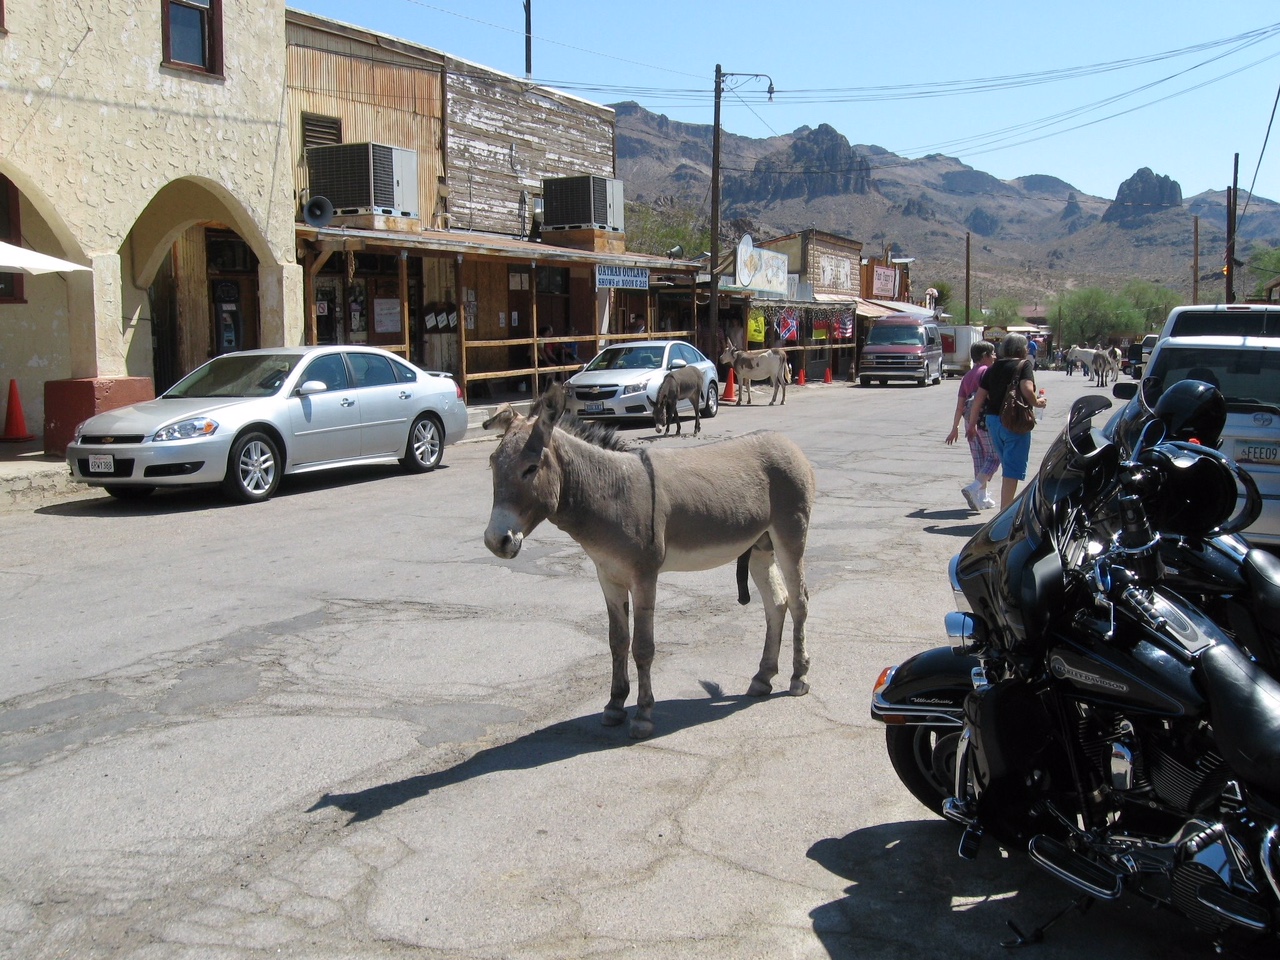 Oatman is a town in the Black Mountains of Mohave County, Arizona.